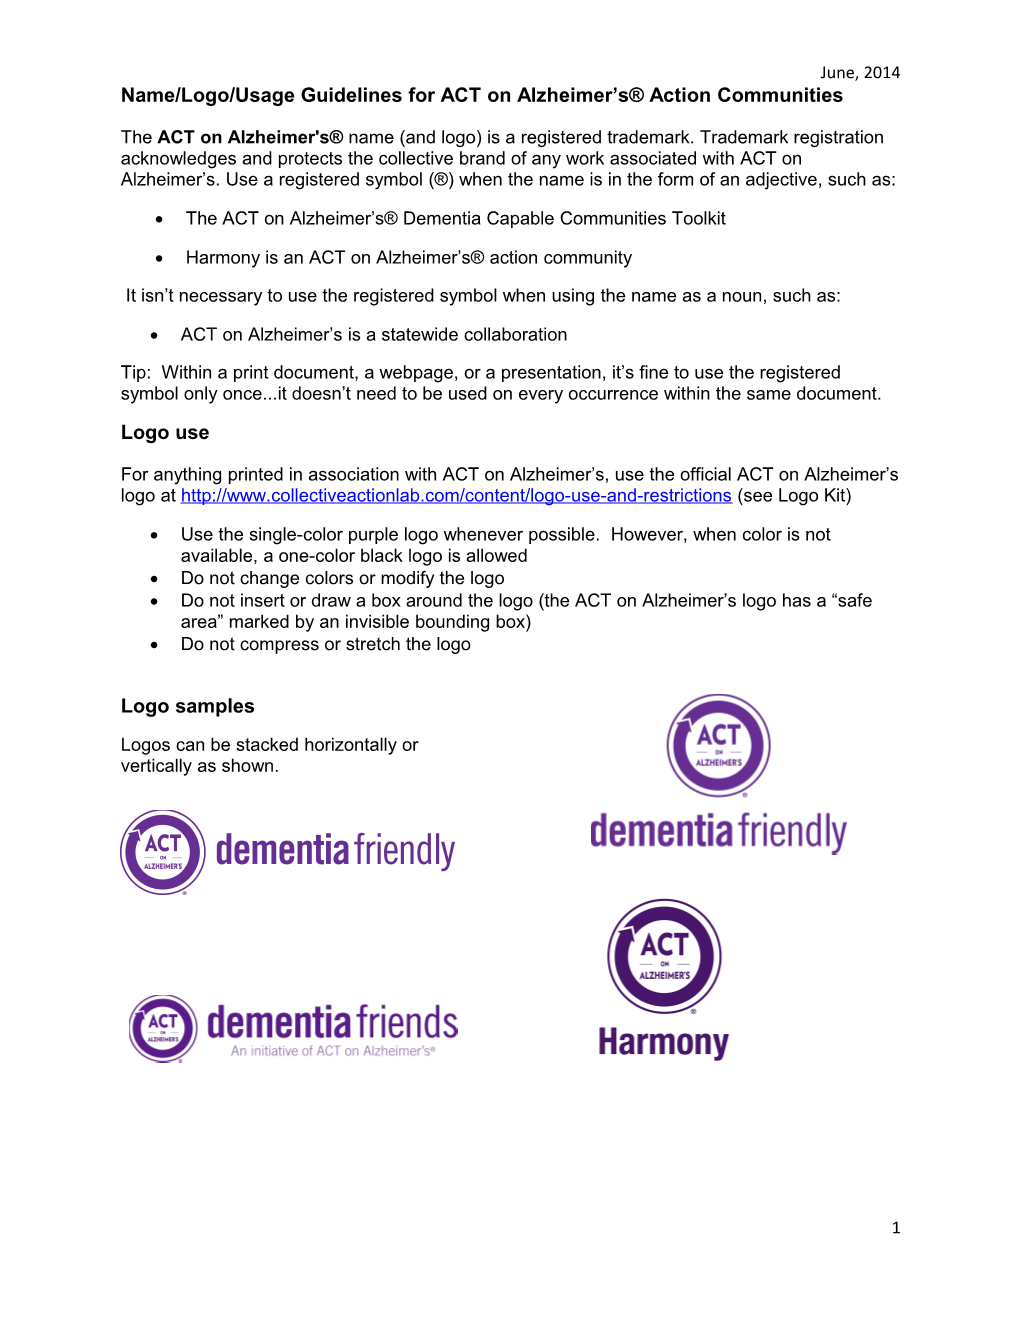 Name/Logo/Usage Guidelines for ACT on Alzheimer S Action Communities